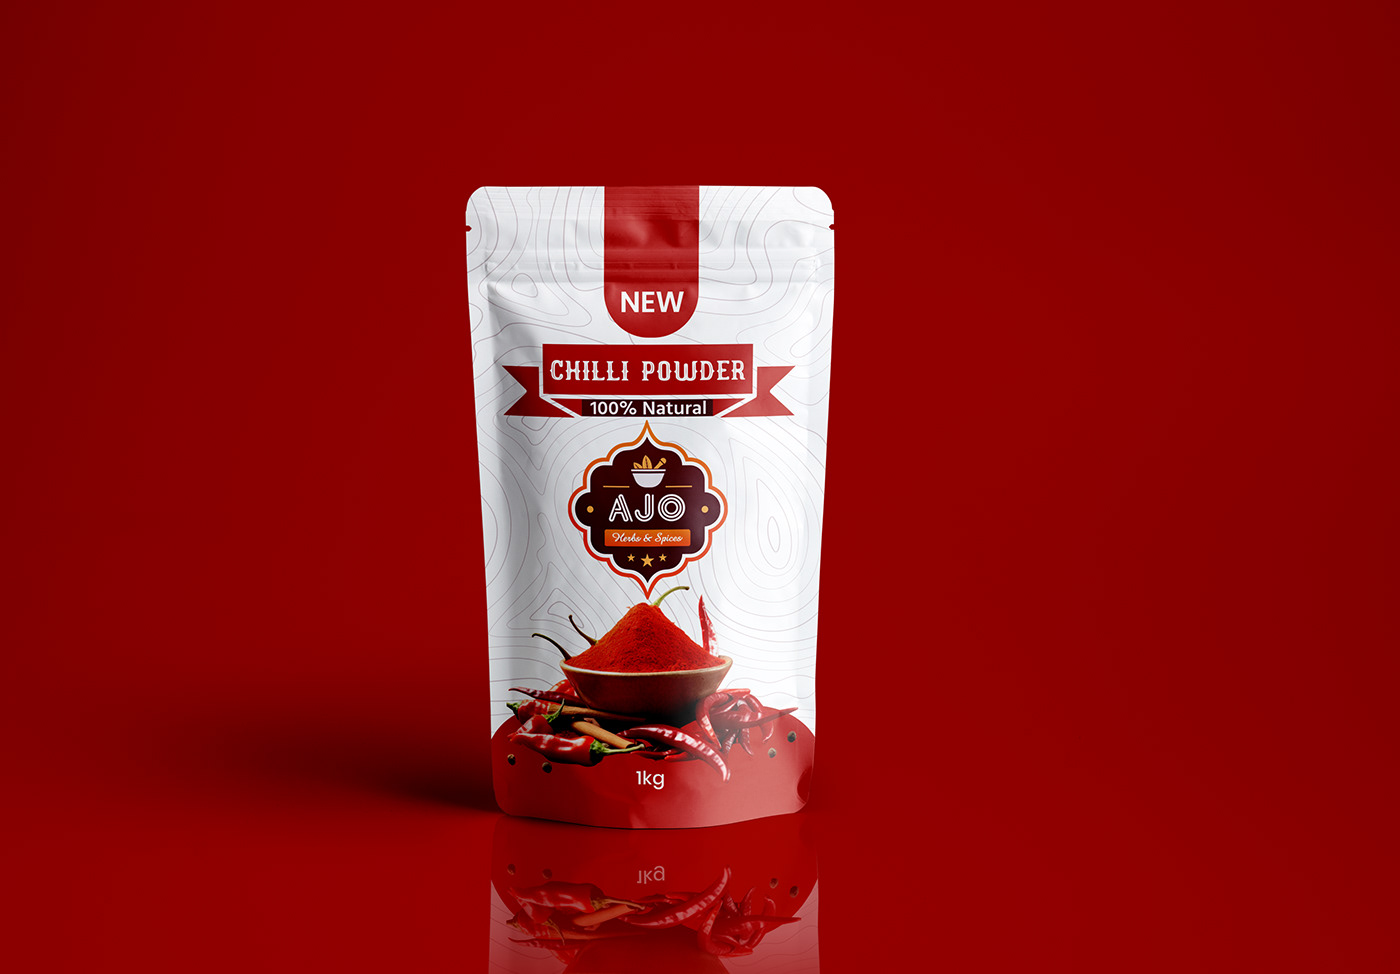 chilli powder product packaging design Graphic Designer chilli label deisgn chilli packaging deisgn Chilli Pouch Design chilli powder packaging new pouch label deisgn Chilli label Design